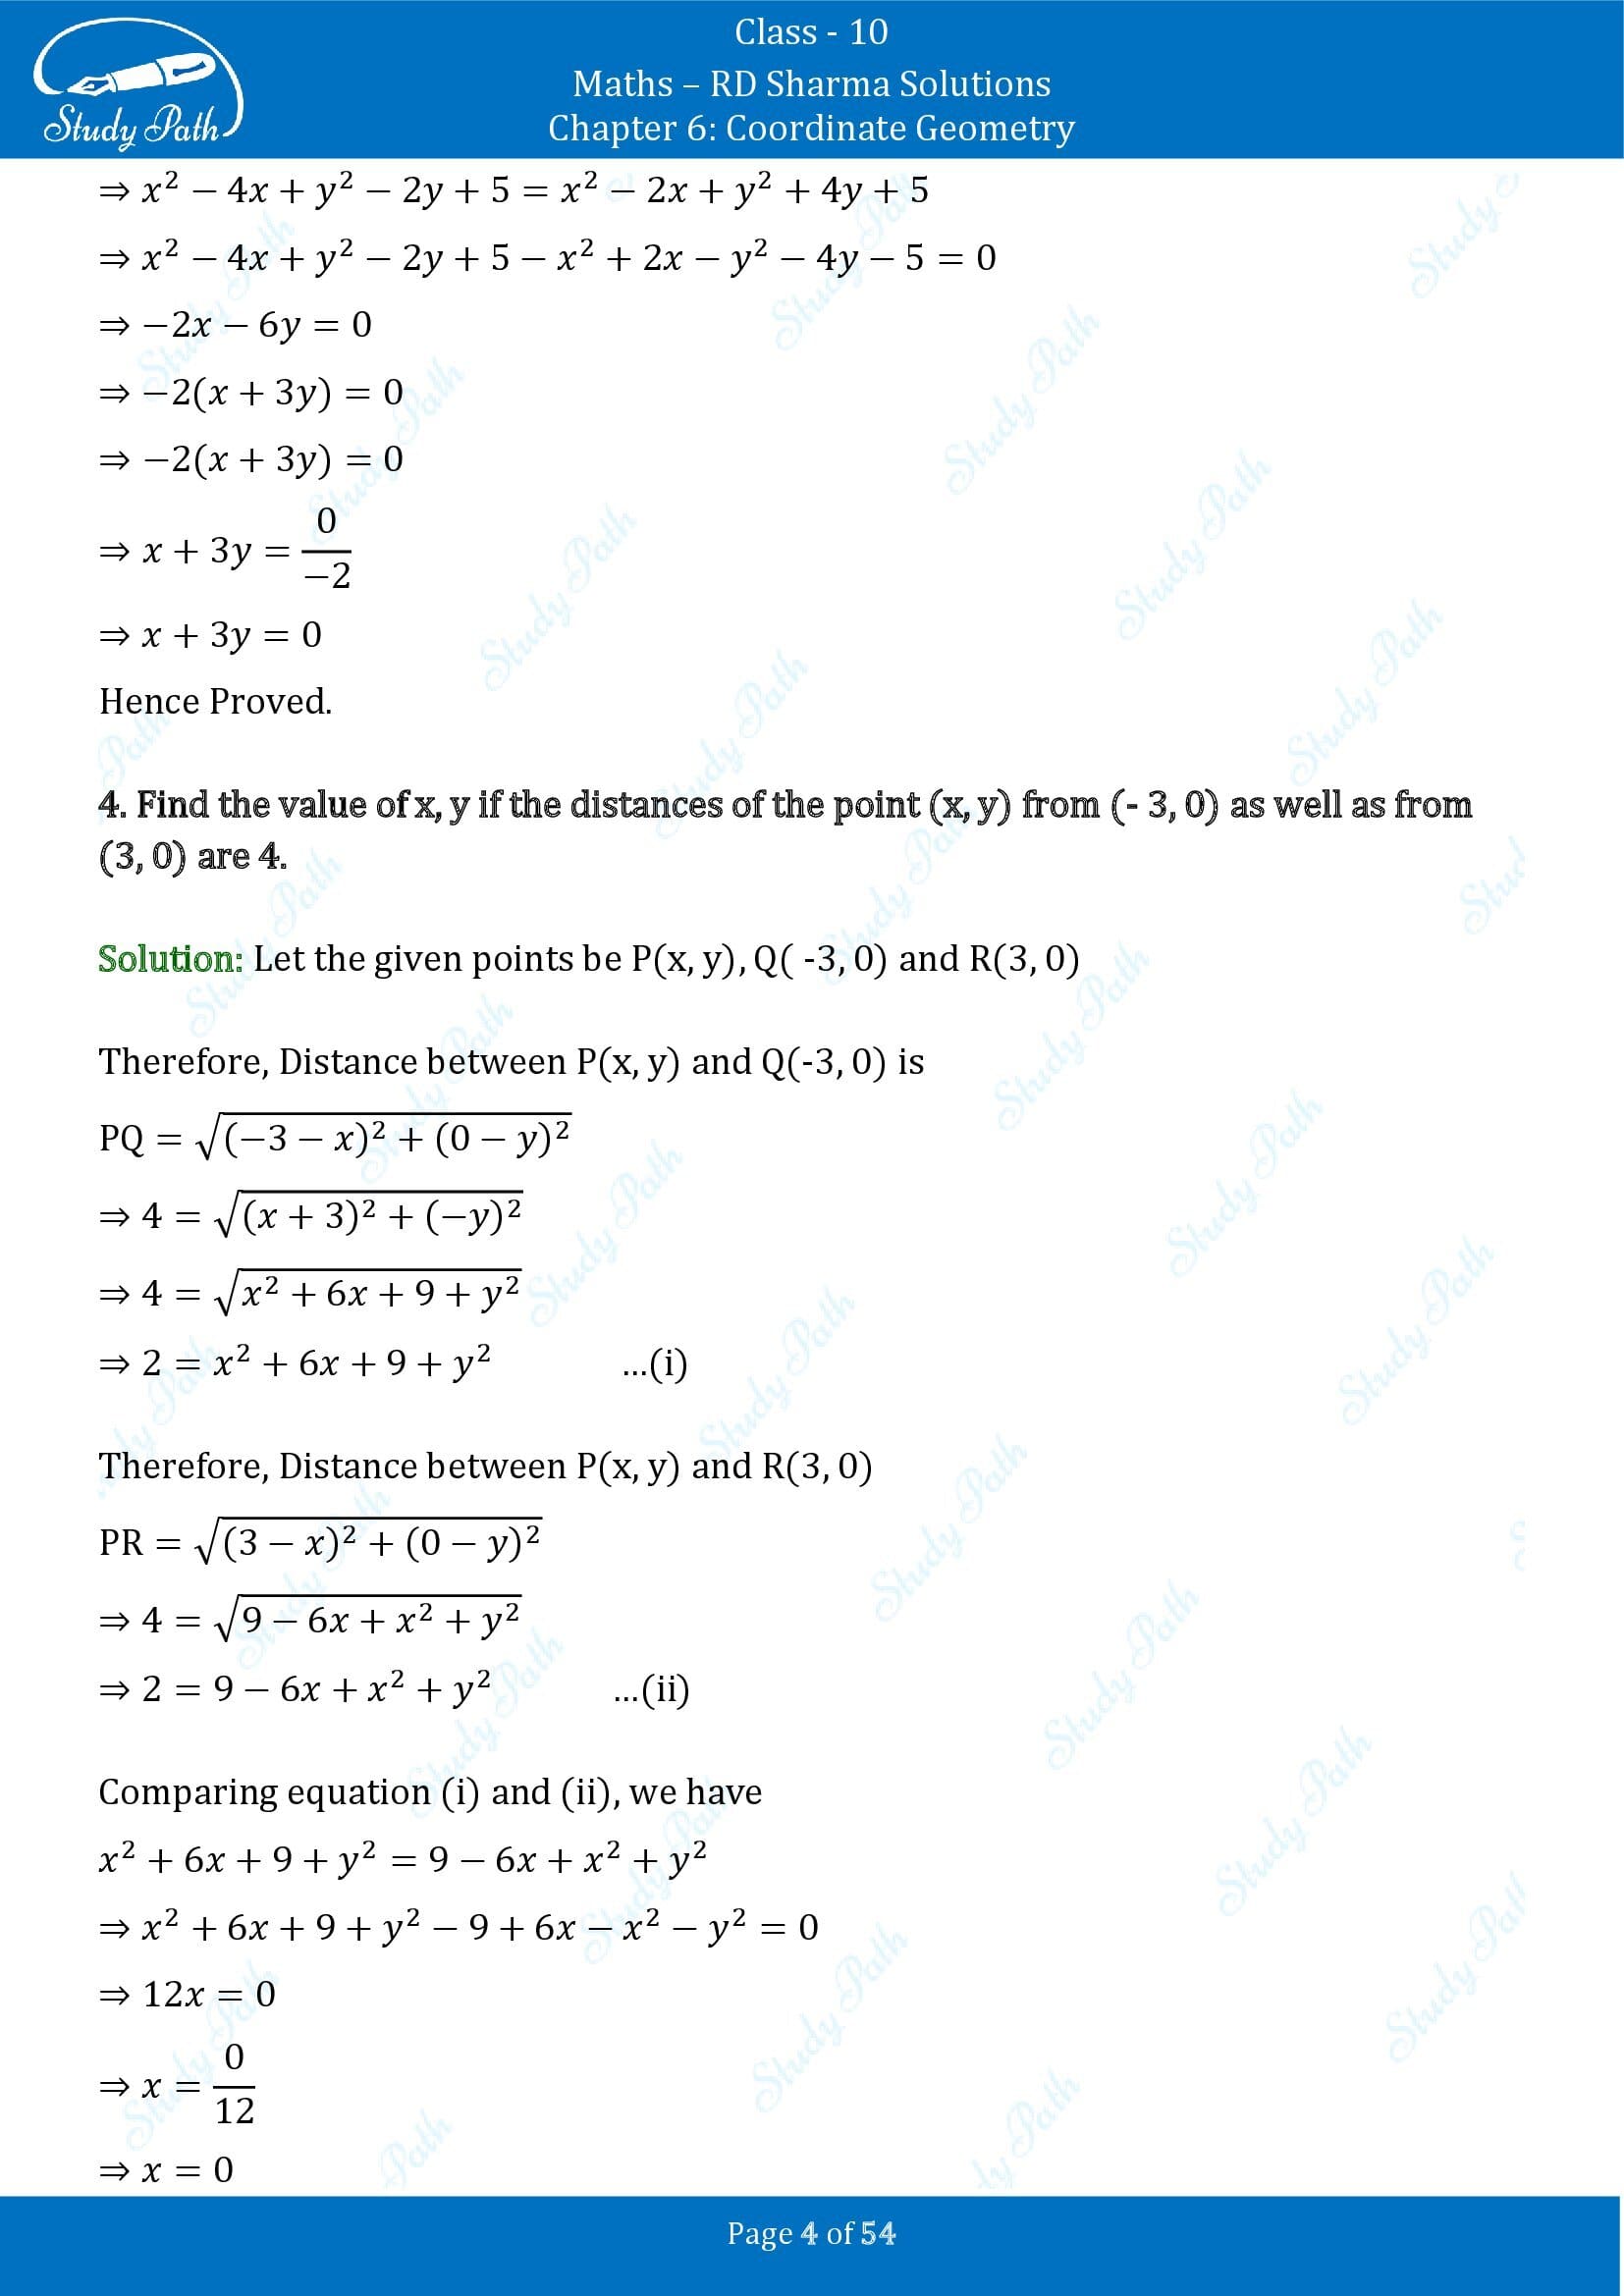 RD Sharma Solutions Class 10 Chapter 6 Coordinate Geometry Exercise 6.2 0004